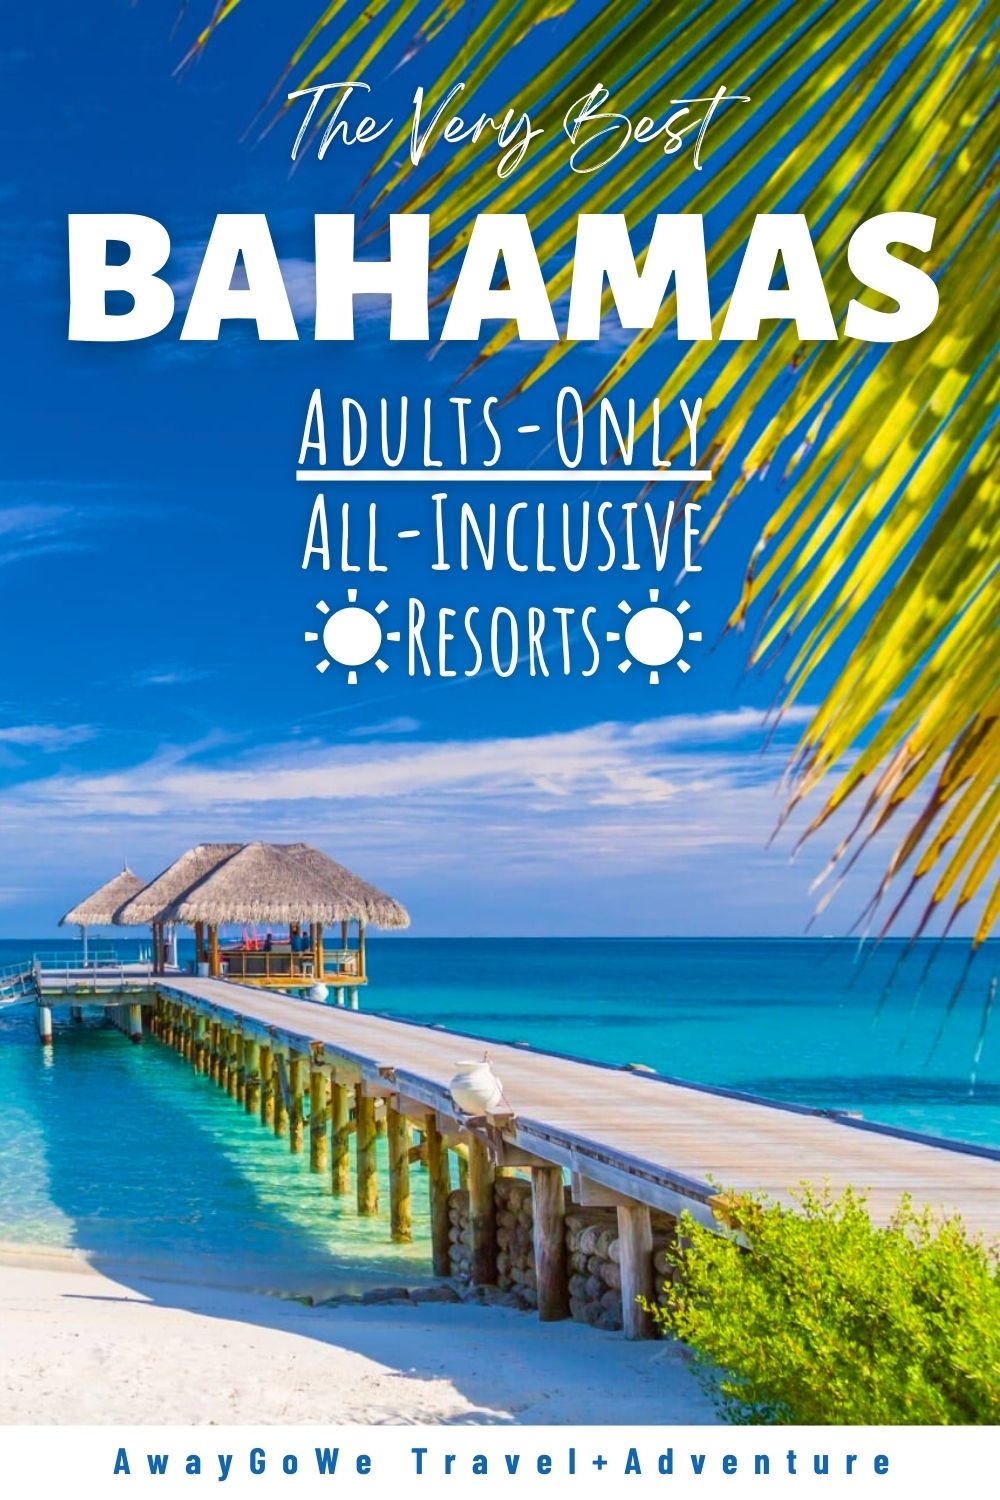 Bahamas adults only all inclusive resorts